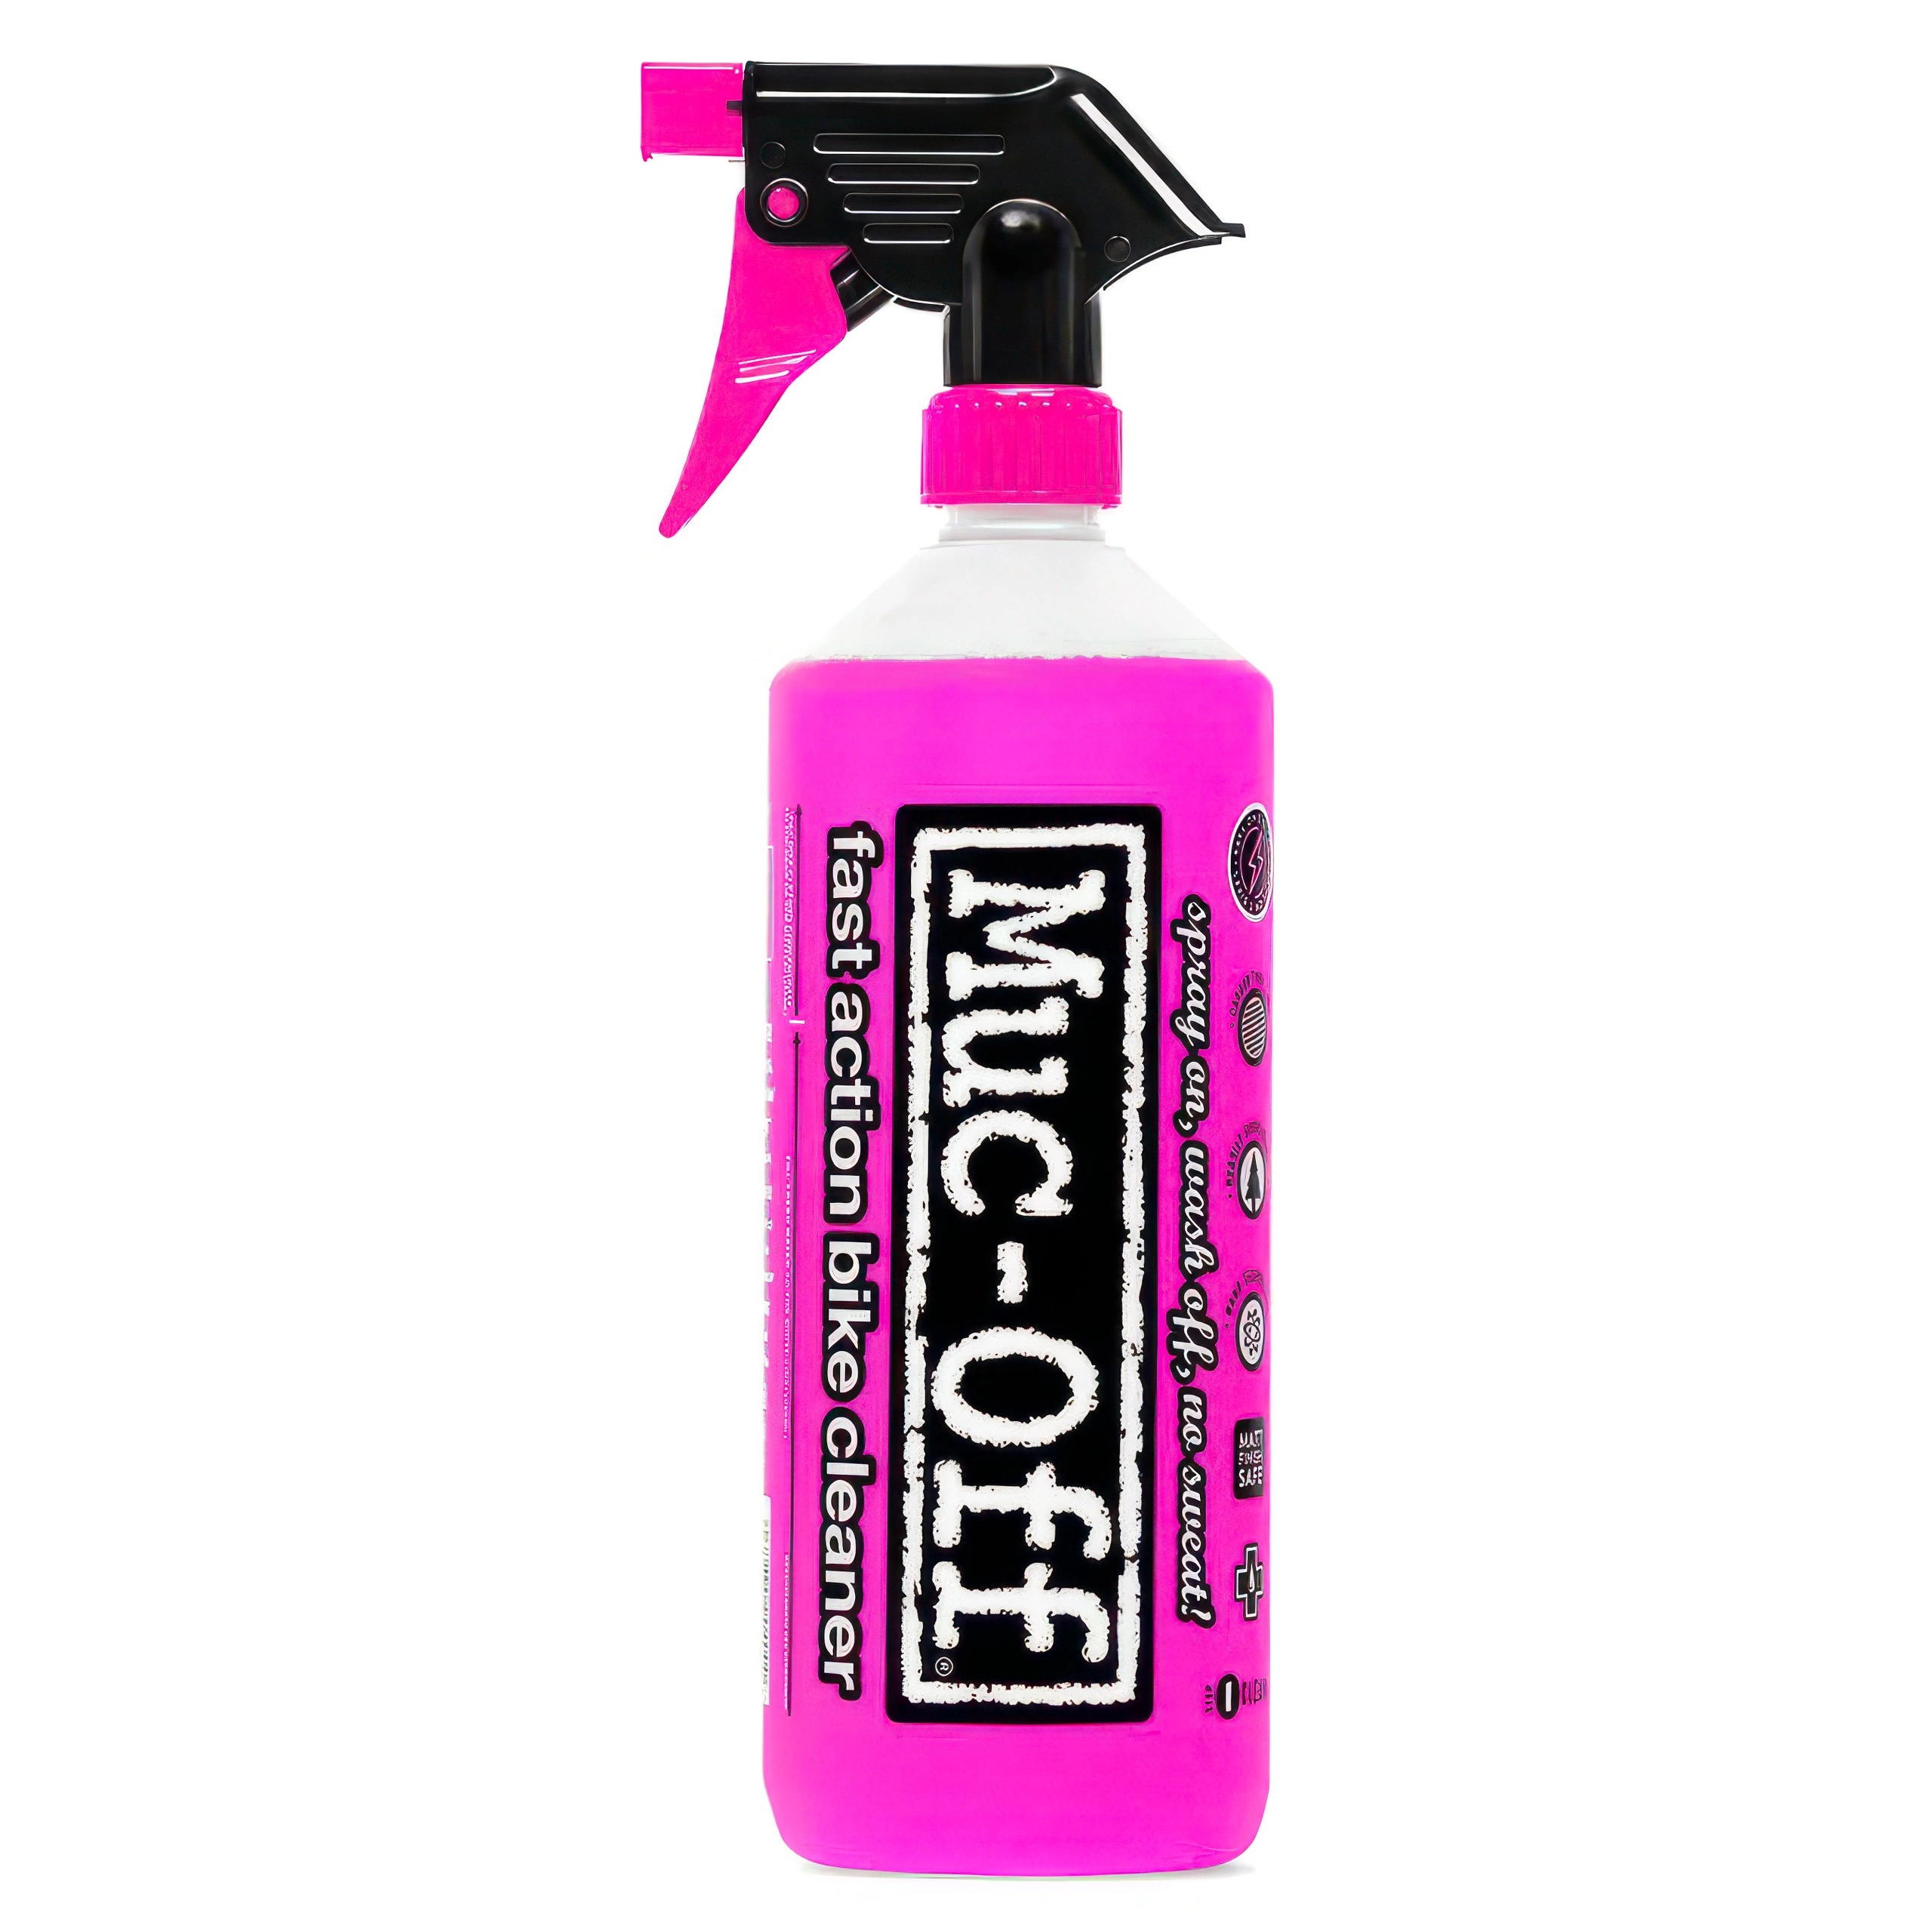 Bicycle Clean, Protect, Lube